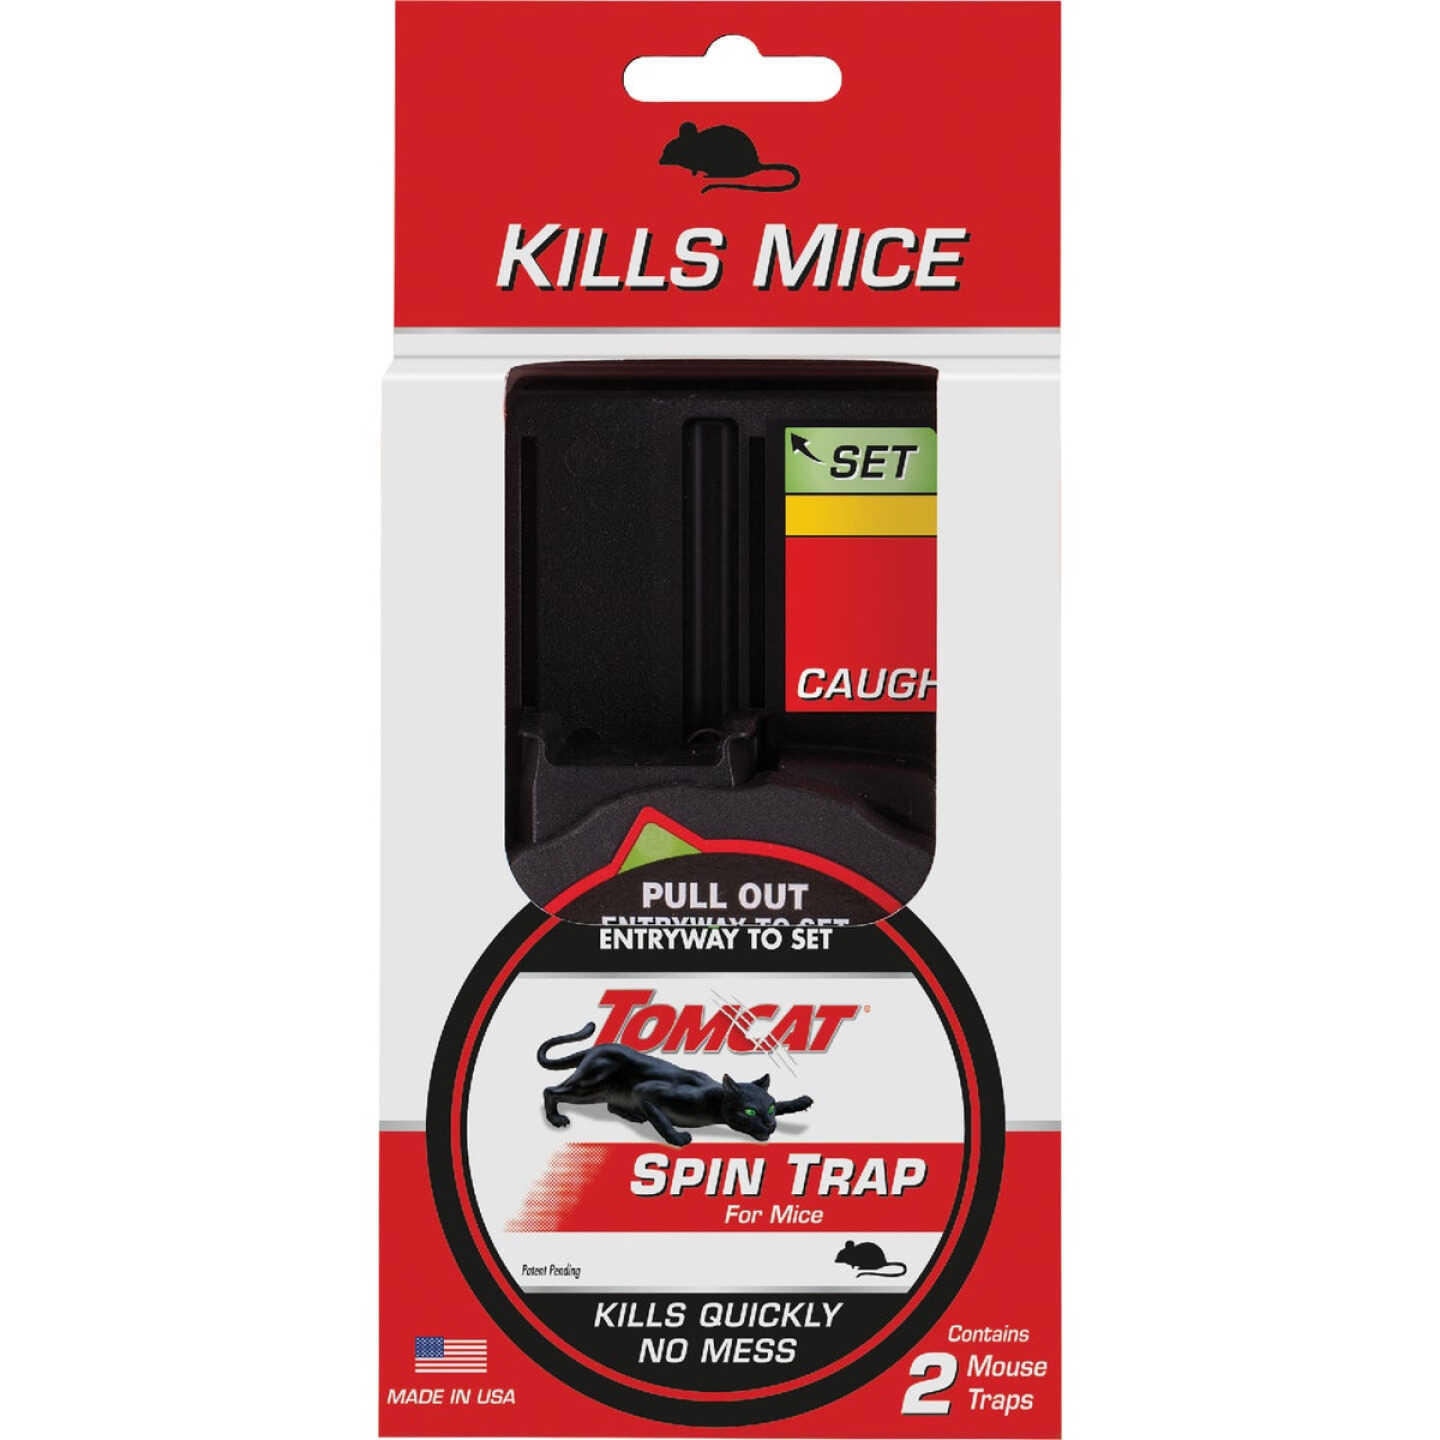 TOMCAT Kill & Contain Mechanical Mouse Traps (2-Pack) - Gillman